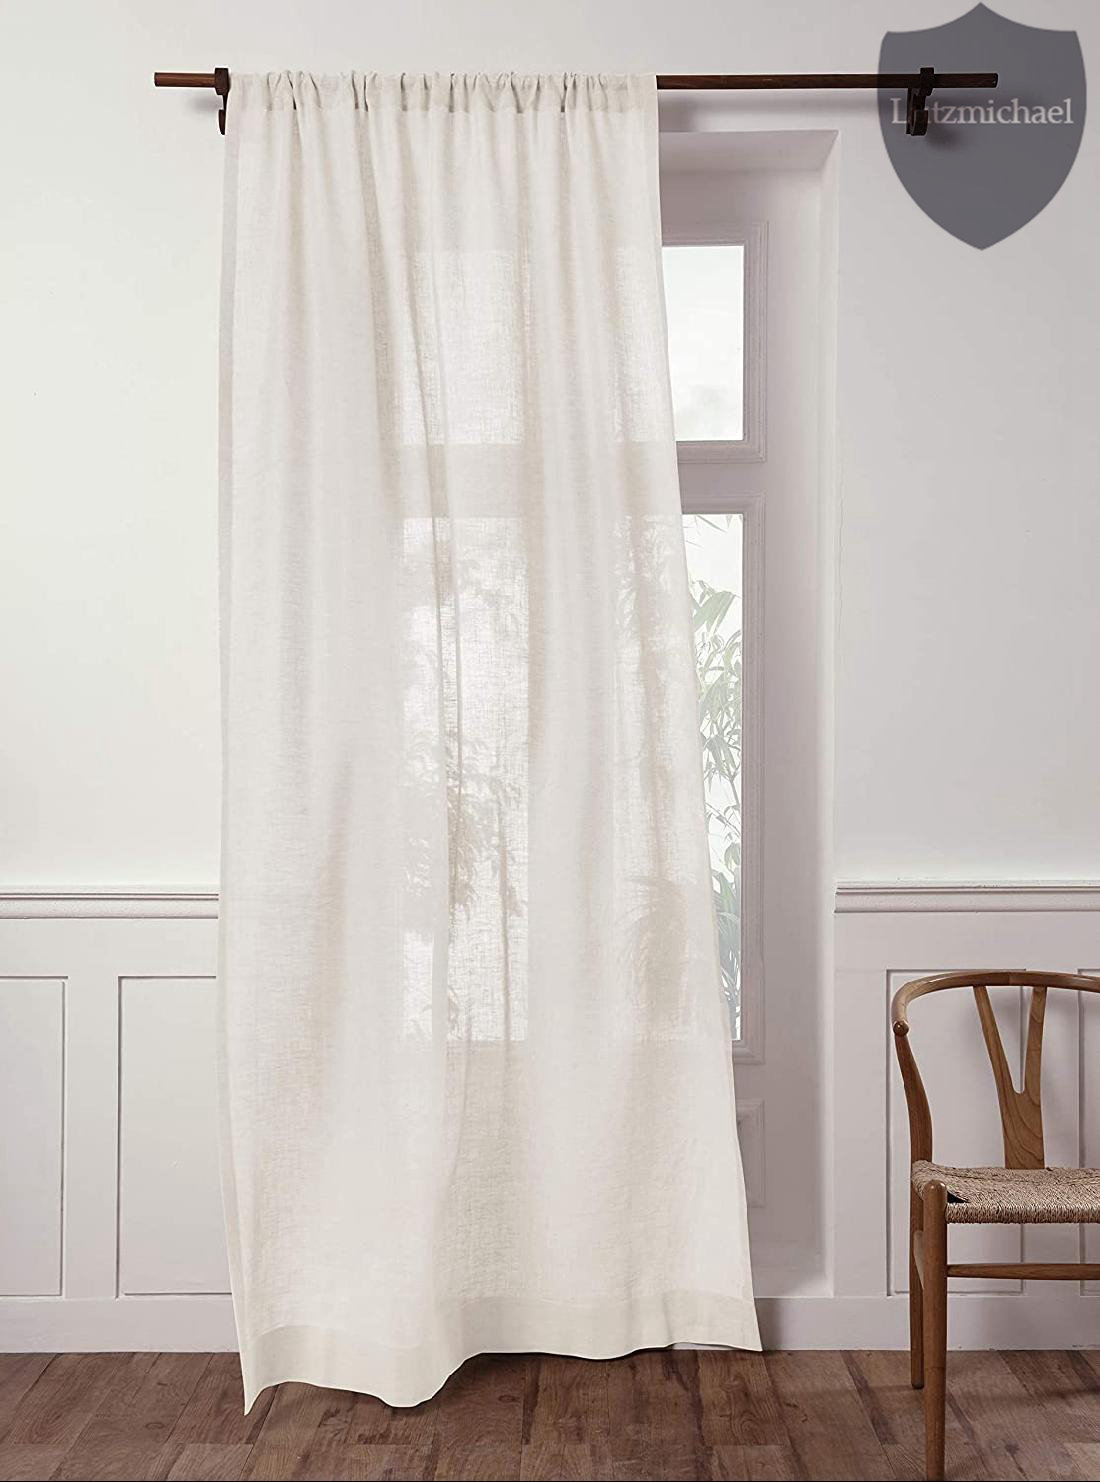 Triple Pinch Pleated Extra Long and Extra Wide Faux Linen Sheer Single Panel